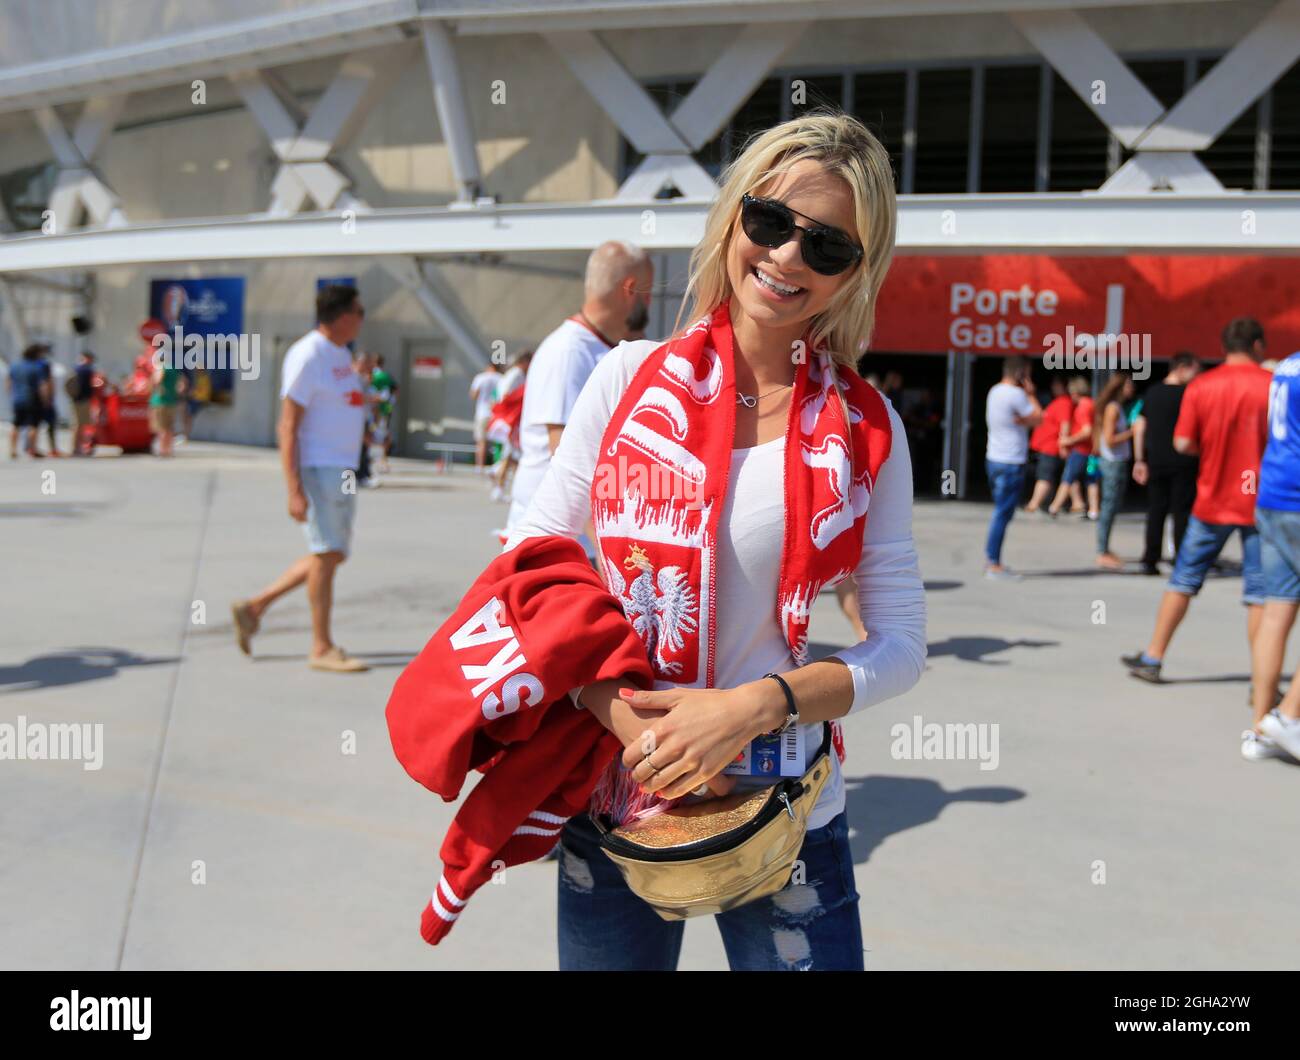 A Polish fans enjoys the atmosphere before the UEFA European Championship 2016 match at the Allianz Riviera, Nice. Picture date June 12th, 2016 Pic David Klein/Sportimage via PA Images Stock Photo